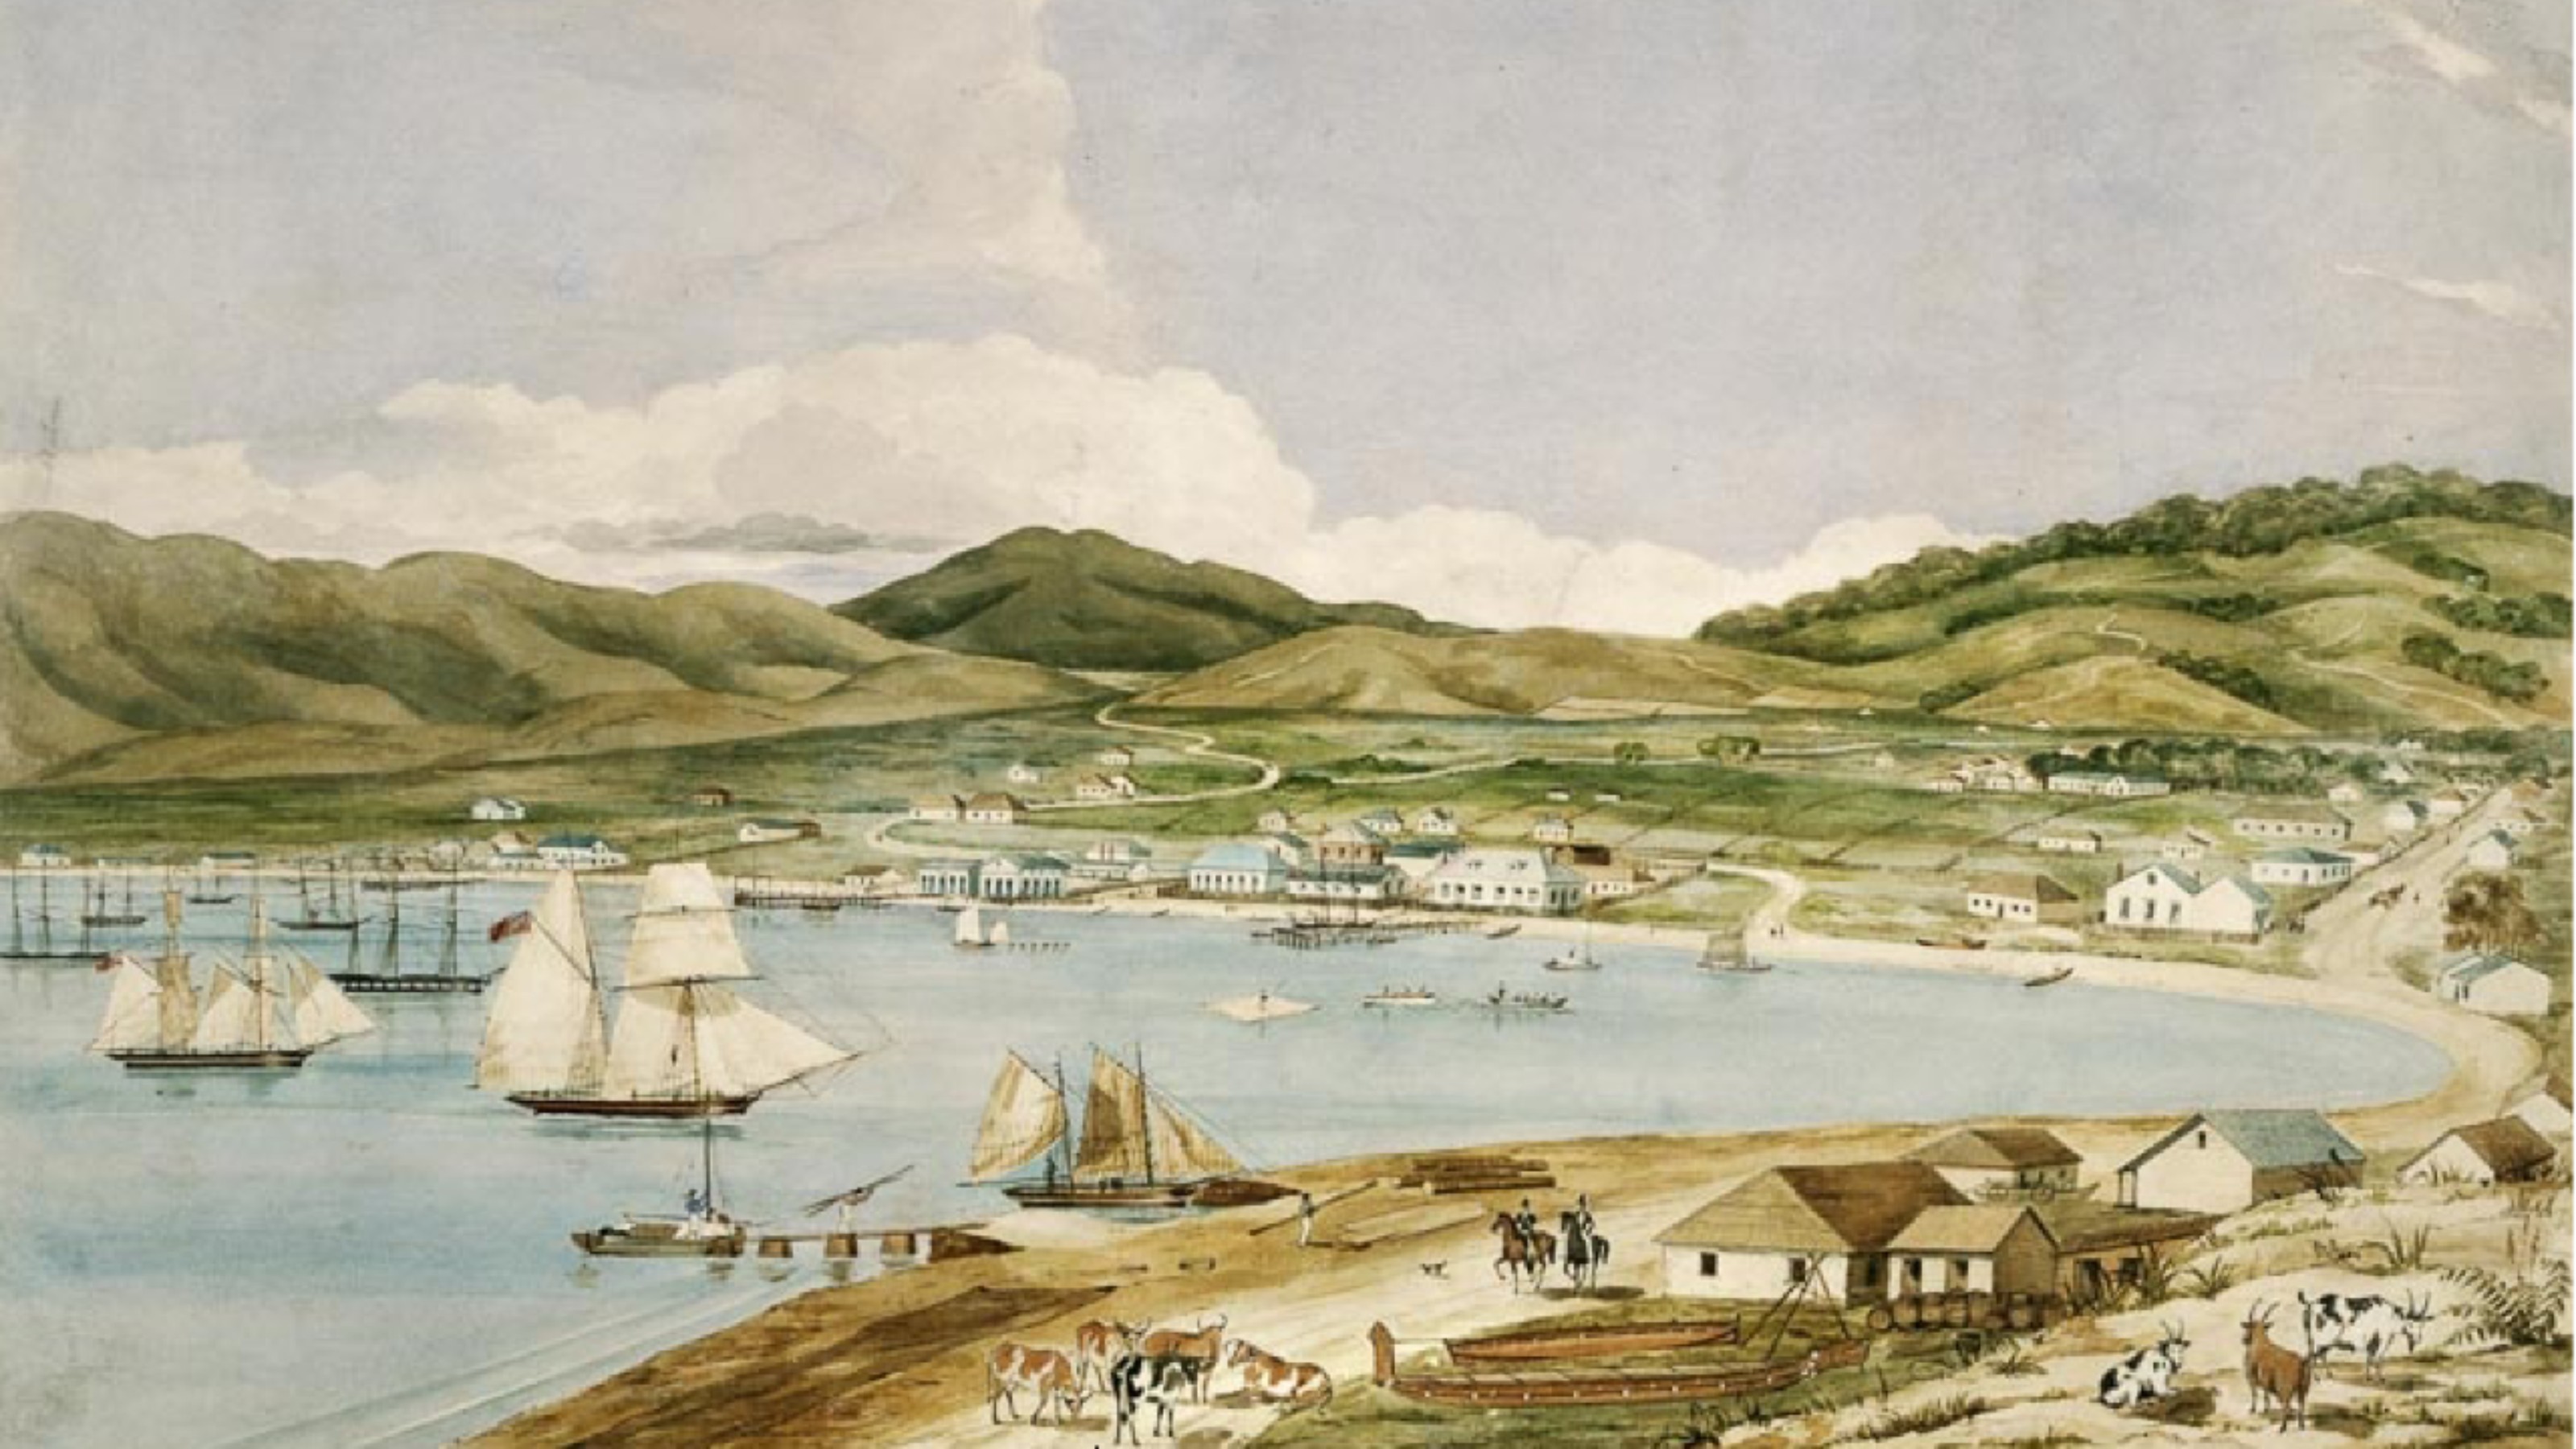 A watercolour painting of Wellington harbour from 1841 showing small buildings and sailing ships.